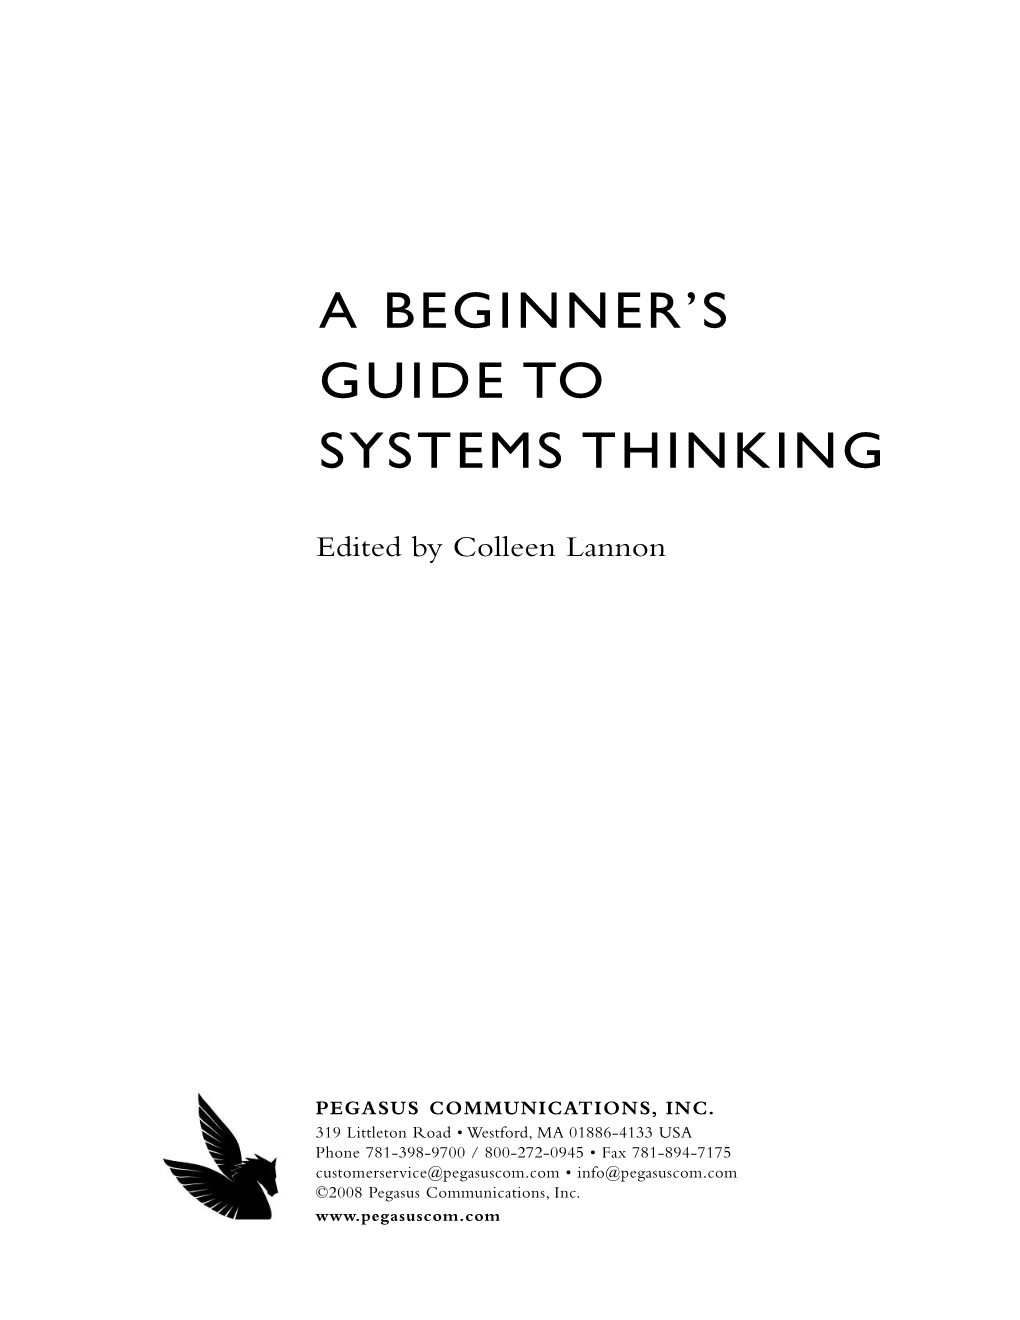 Beginners Guide to Systems Thinking